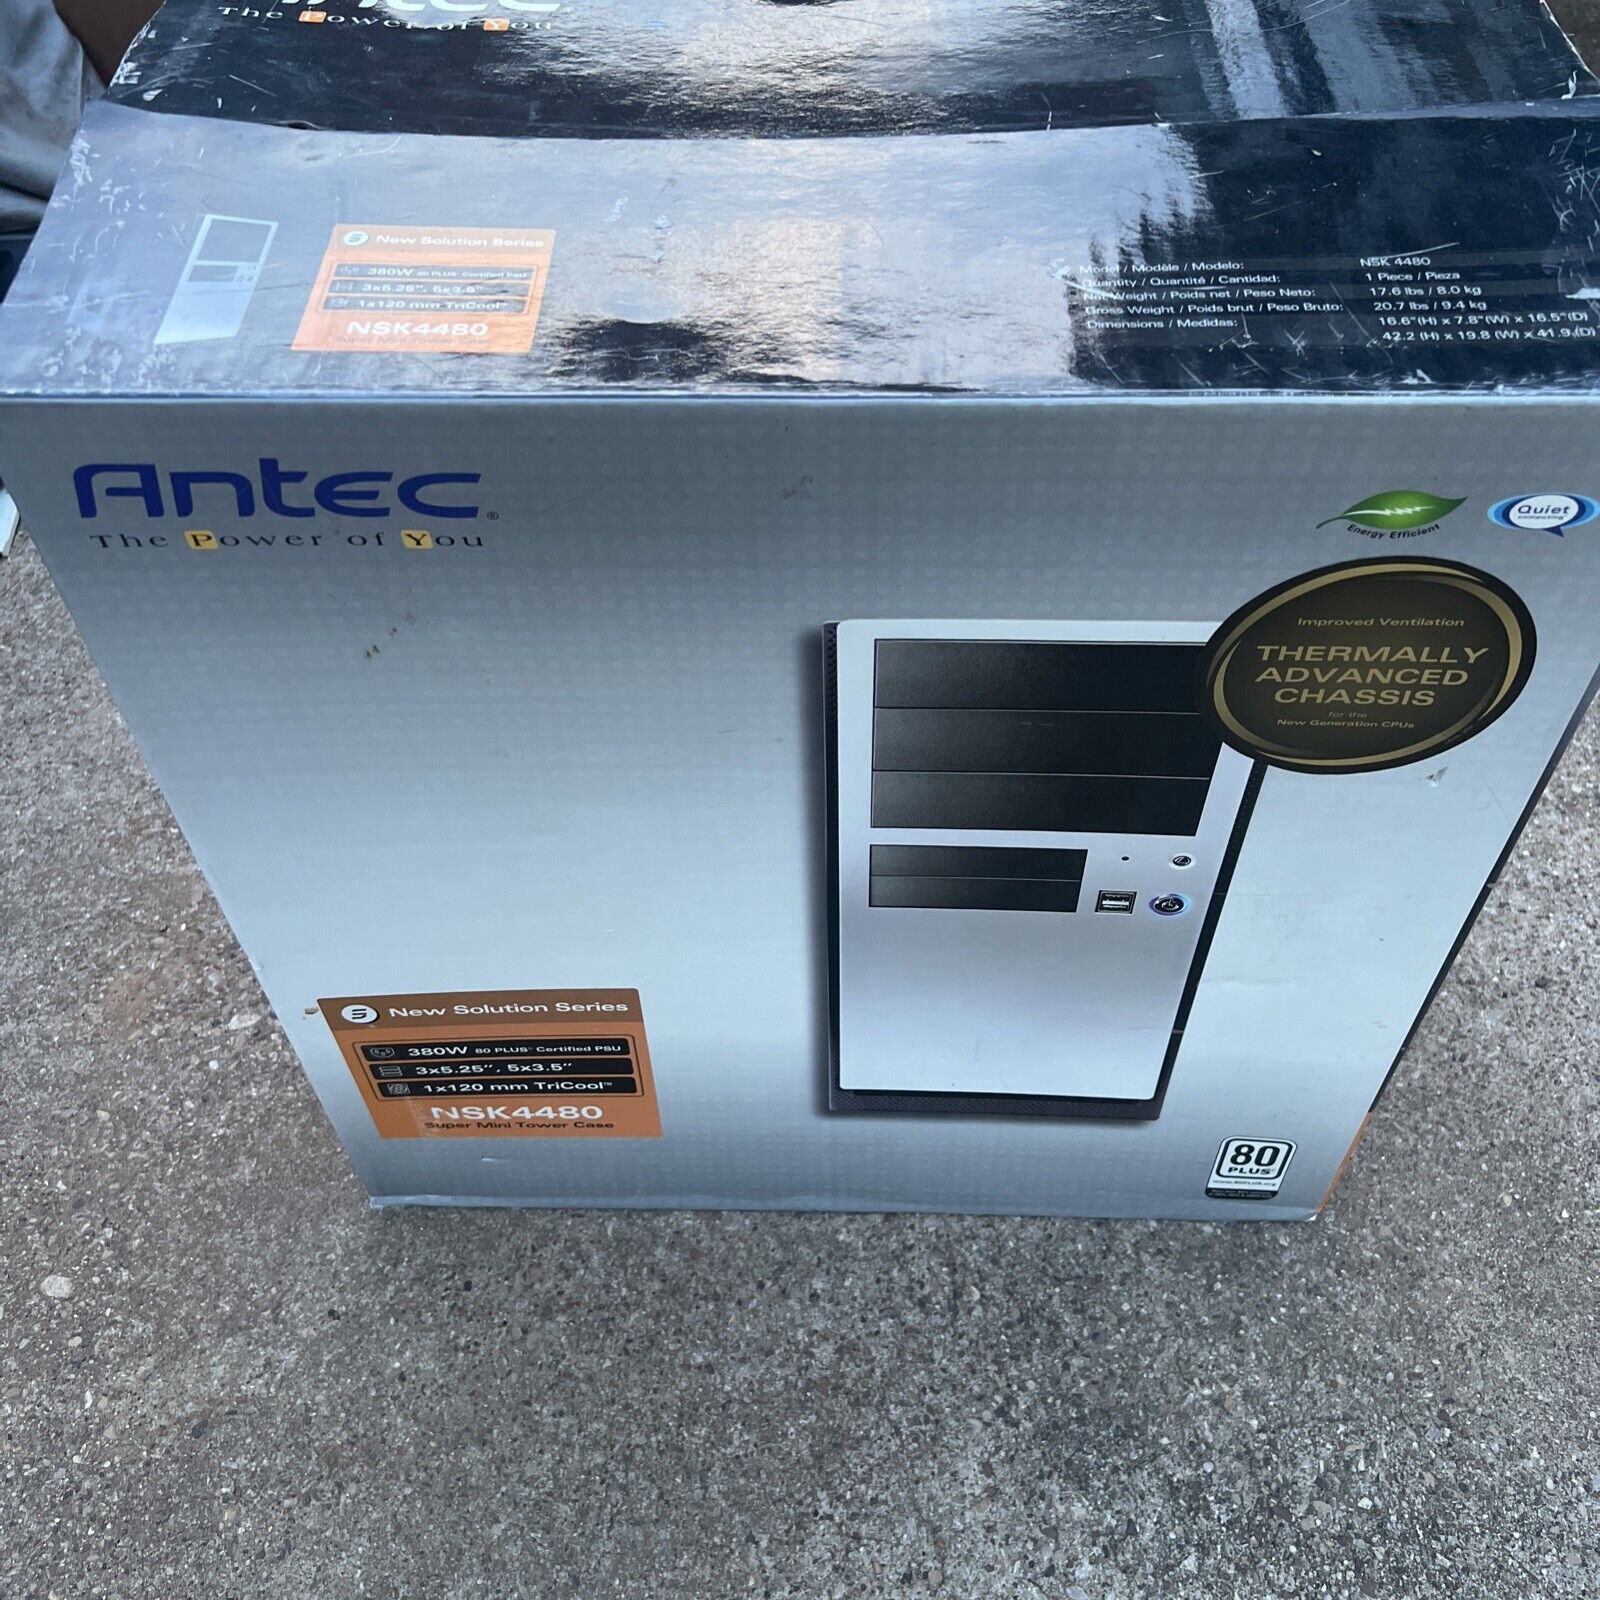 Vintage Antec New Solution (NSK4480) ATX Mid Tower Computer Case - BRAND NEW